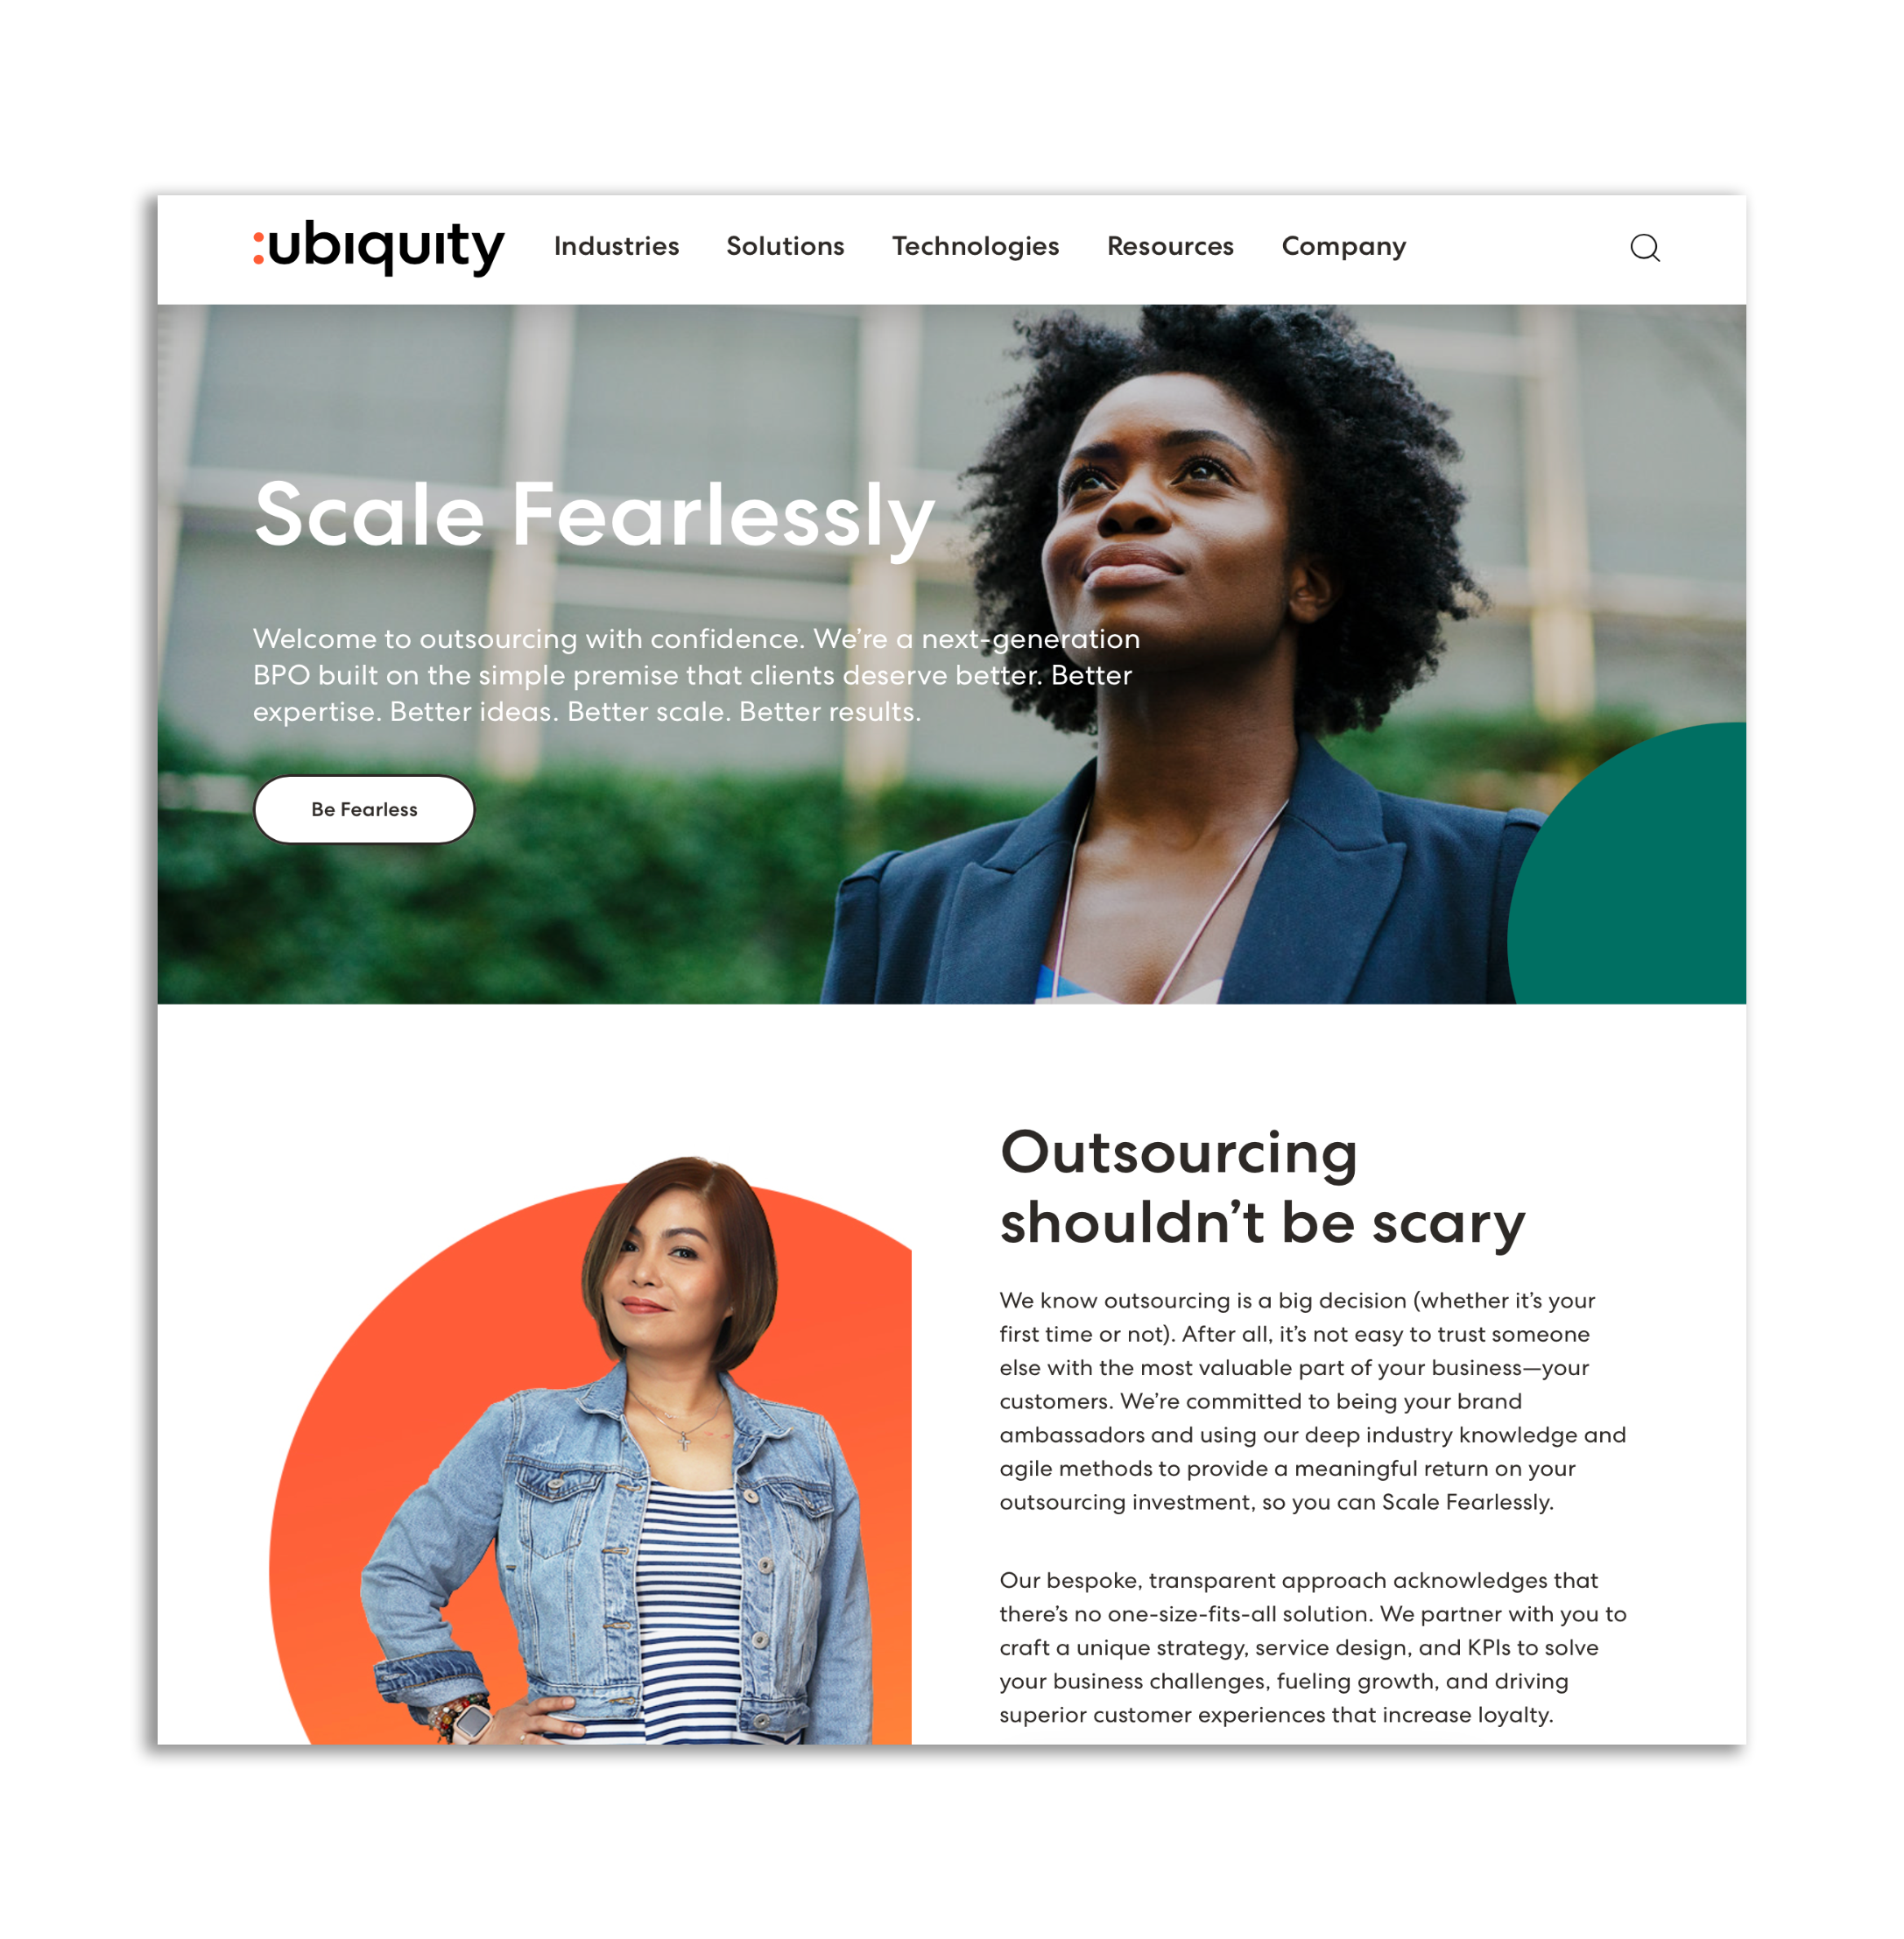 Ubiquity: Scale Fearlessly